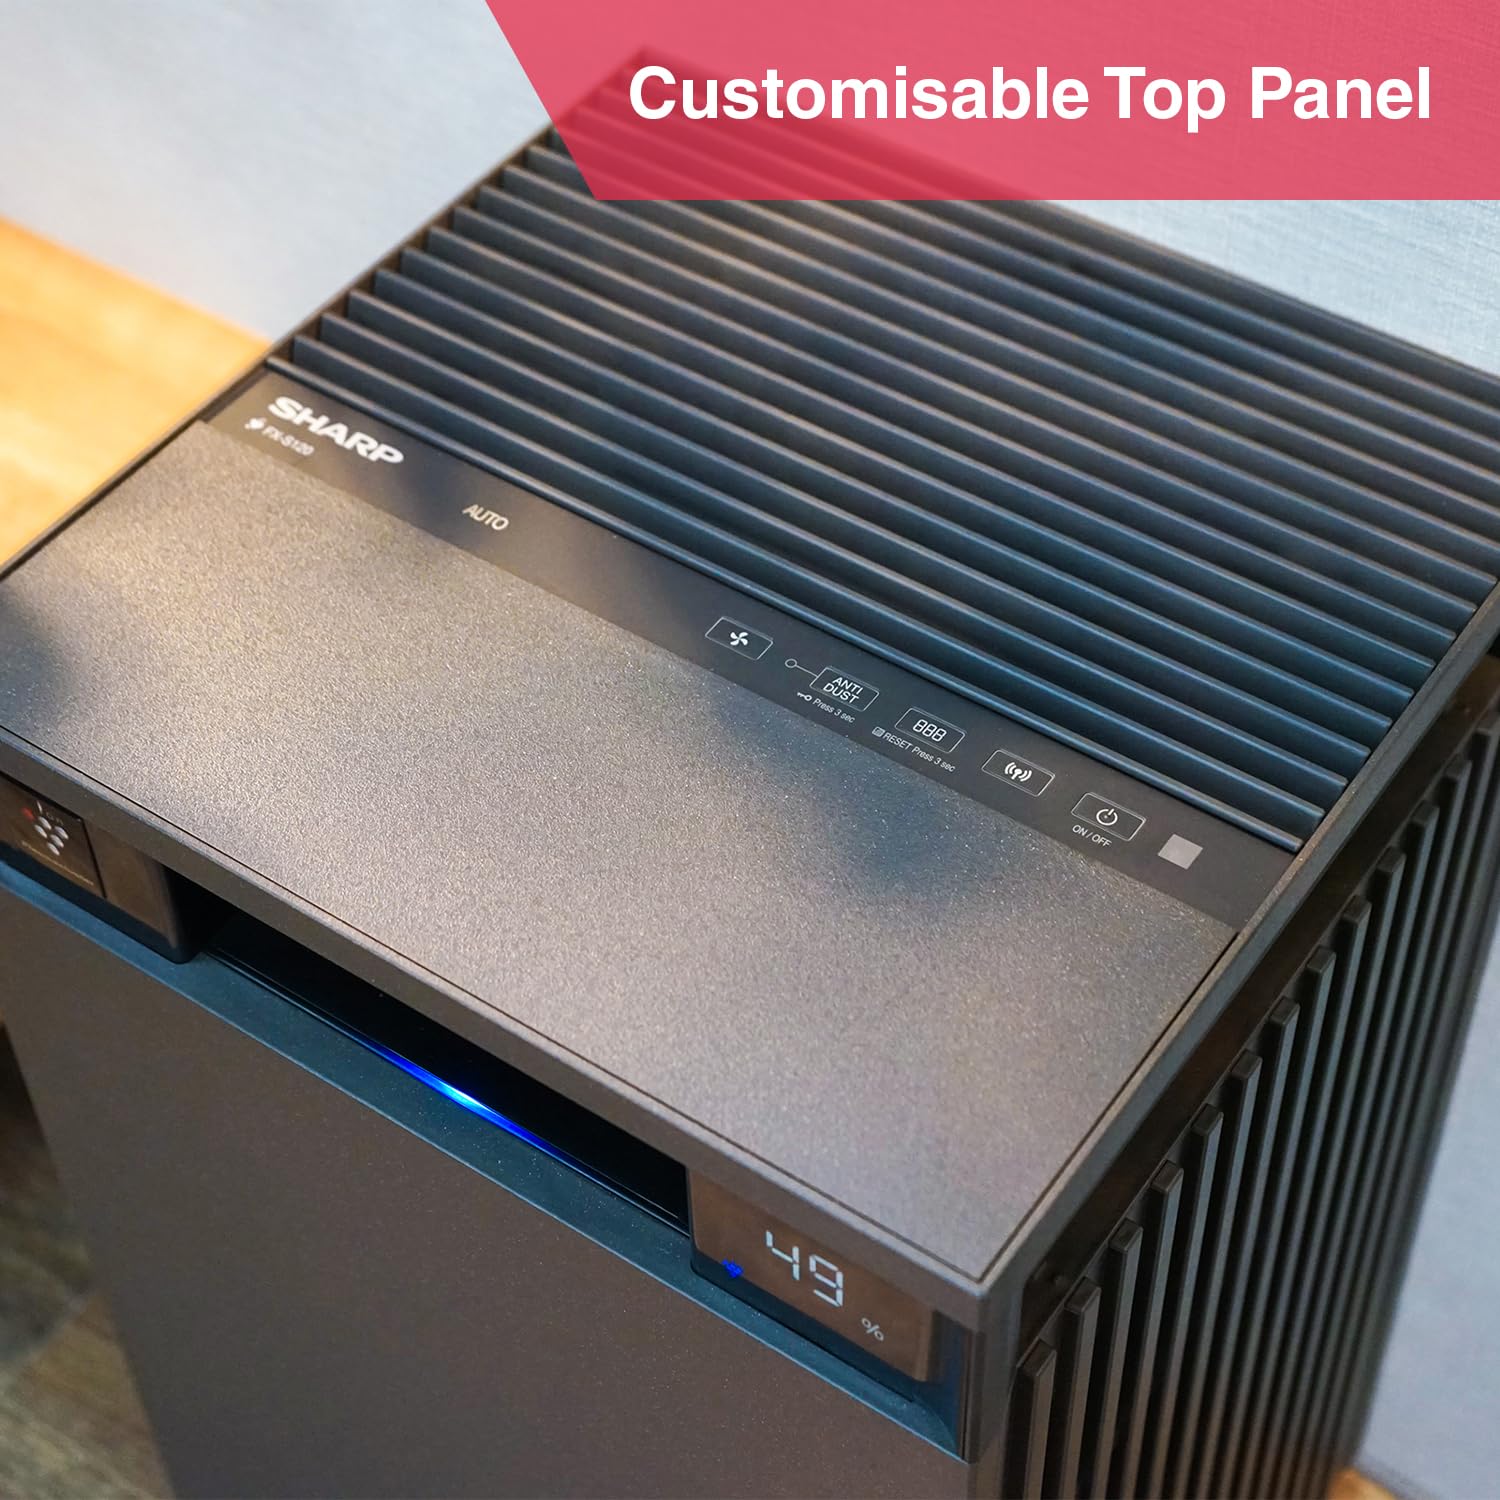 SHARP FX-S120M-H Air Purifier for Home | Wi-Fi Connectivity, Remote Operation Capability, PM 2.5 Display Mahajan Electronics Online